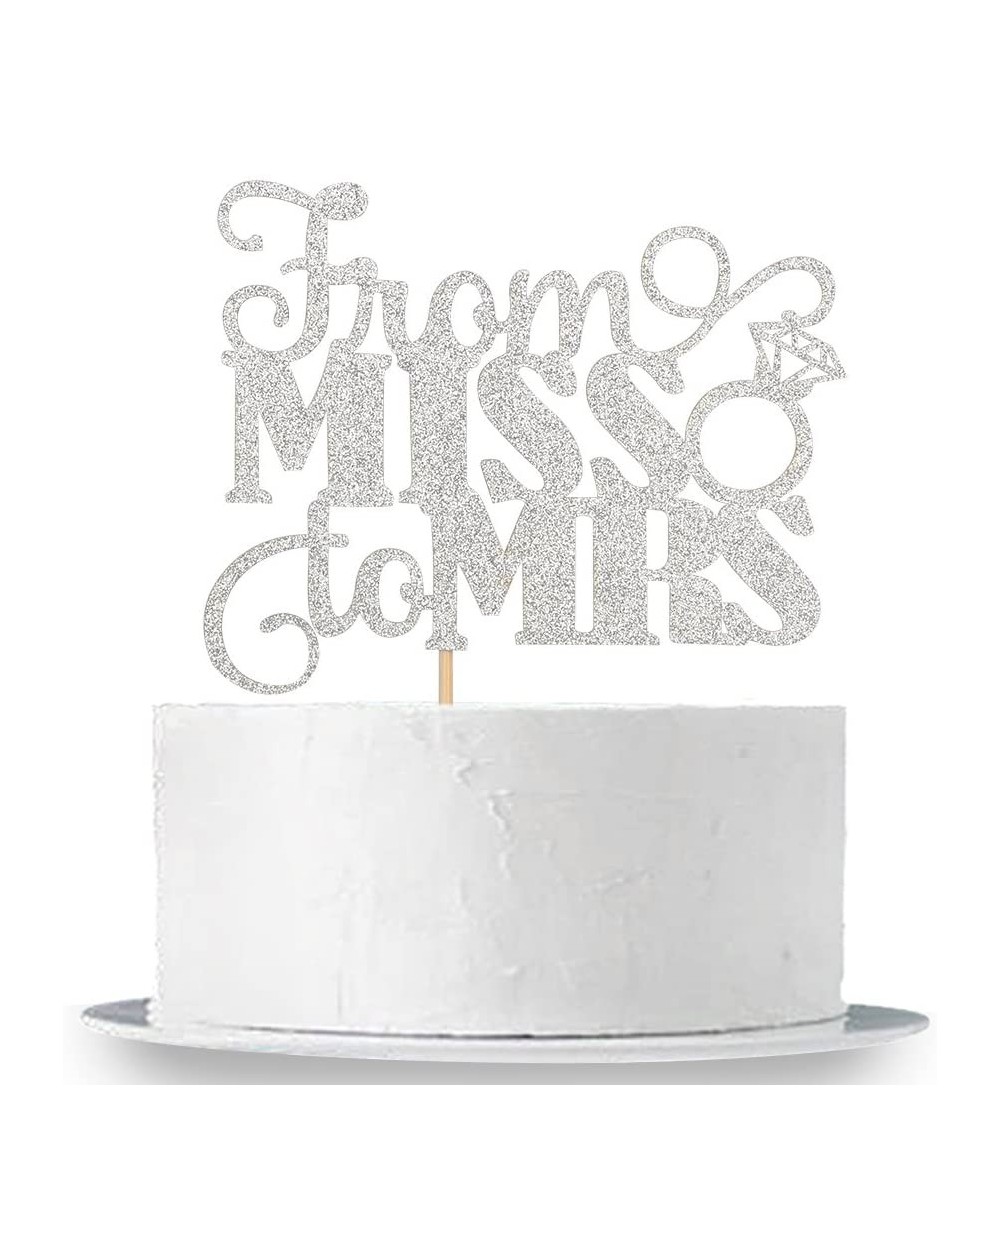 Cake & Cupcake Toppers Silver Glitter From Miss To Mrs Cake Topper - Bridal Shower Party Decorations Supplies - CE18EYL5AHR $...